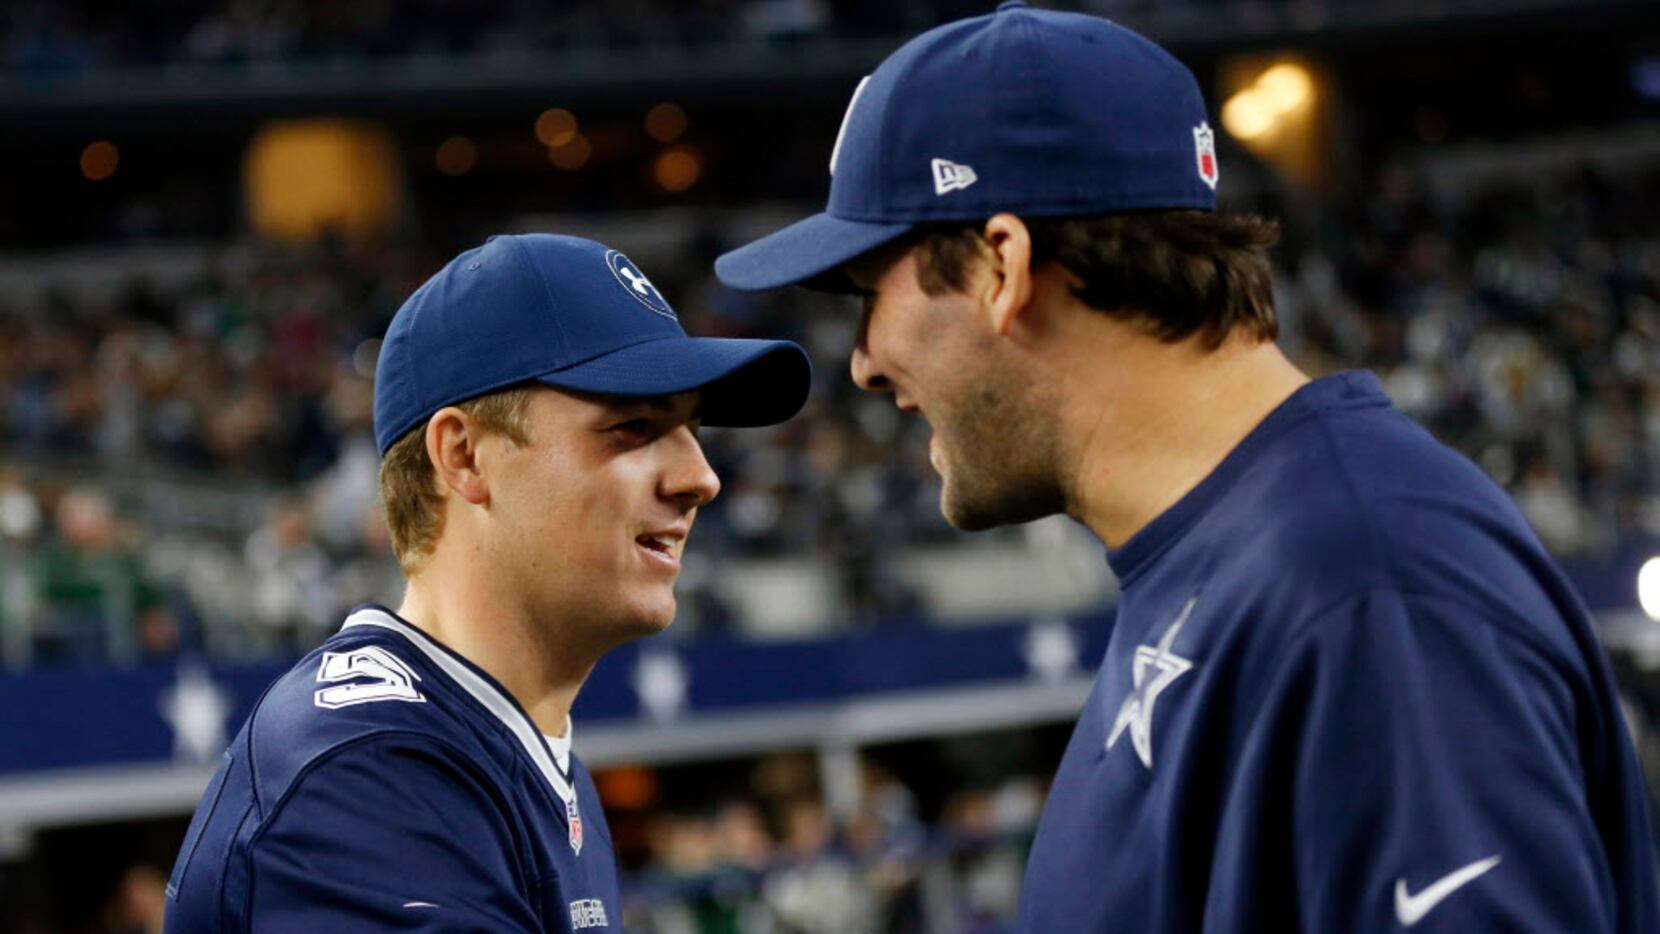 We were the champions: Generation of Cowboys fans who crave title settle  for soap opera